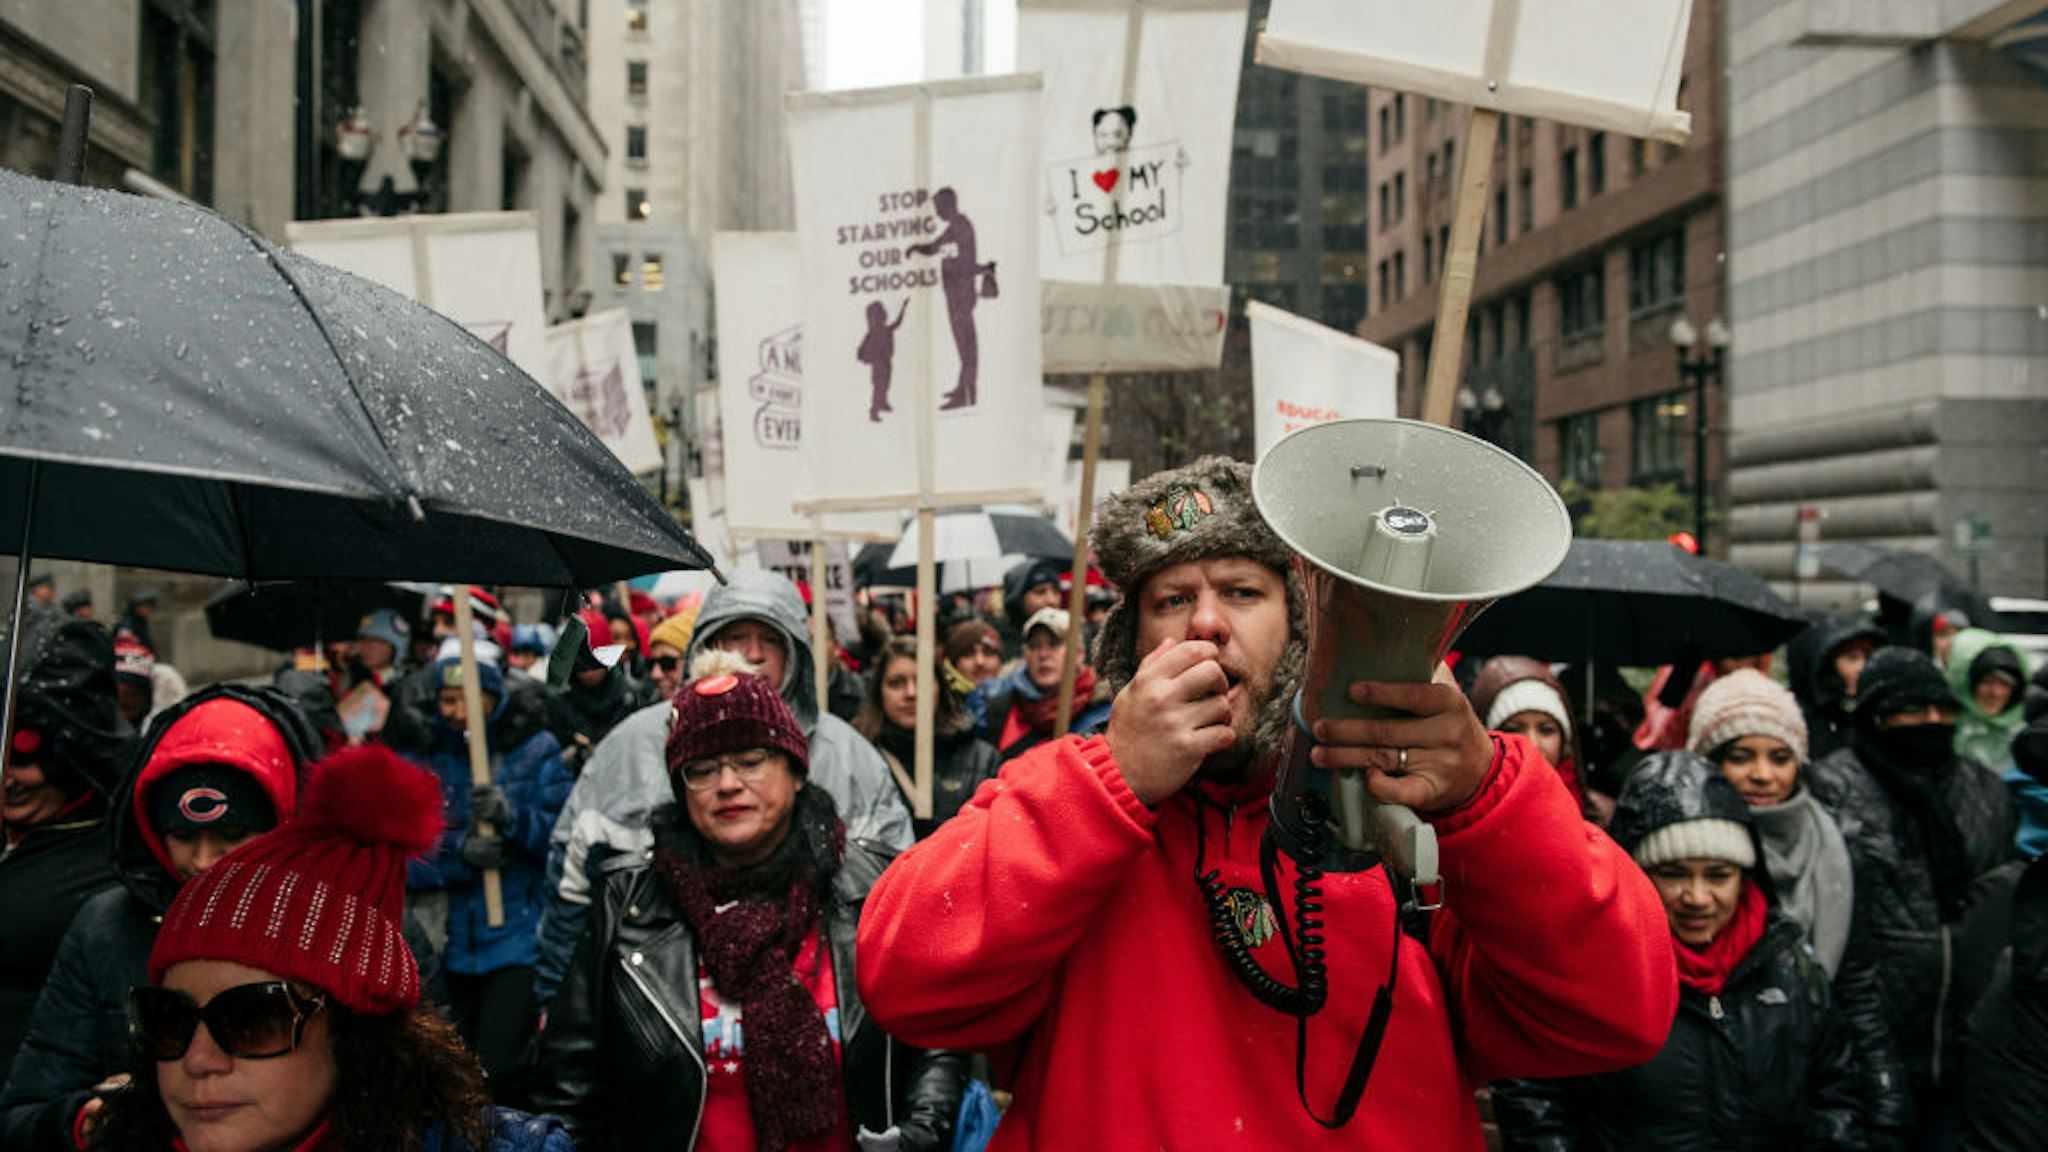 Braving snow and cold temperatures, thousands marched through the streets near City Hall during the 11th day of an ongoing teachers strike on October 31, 2019 in Chicago, Illinois.